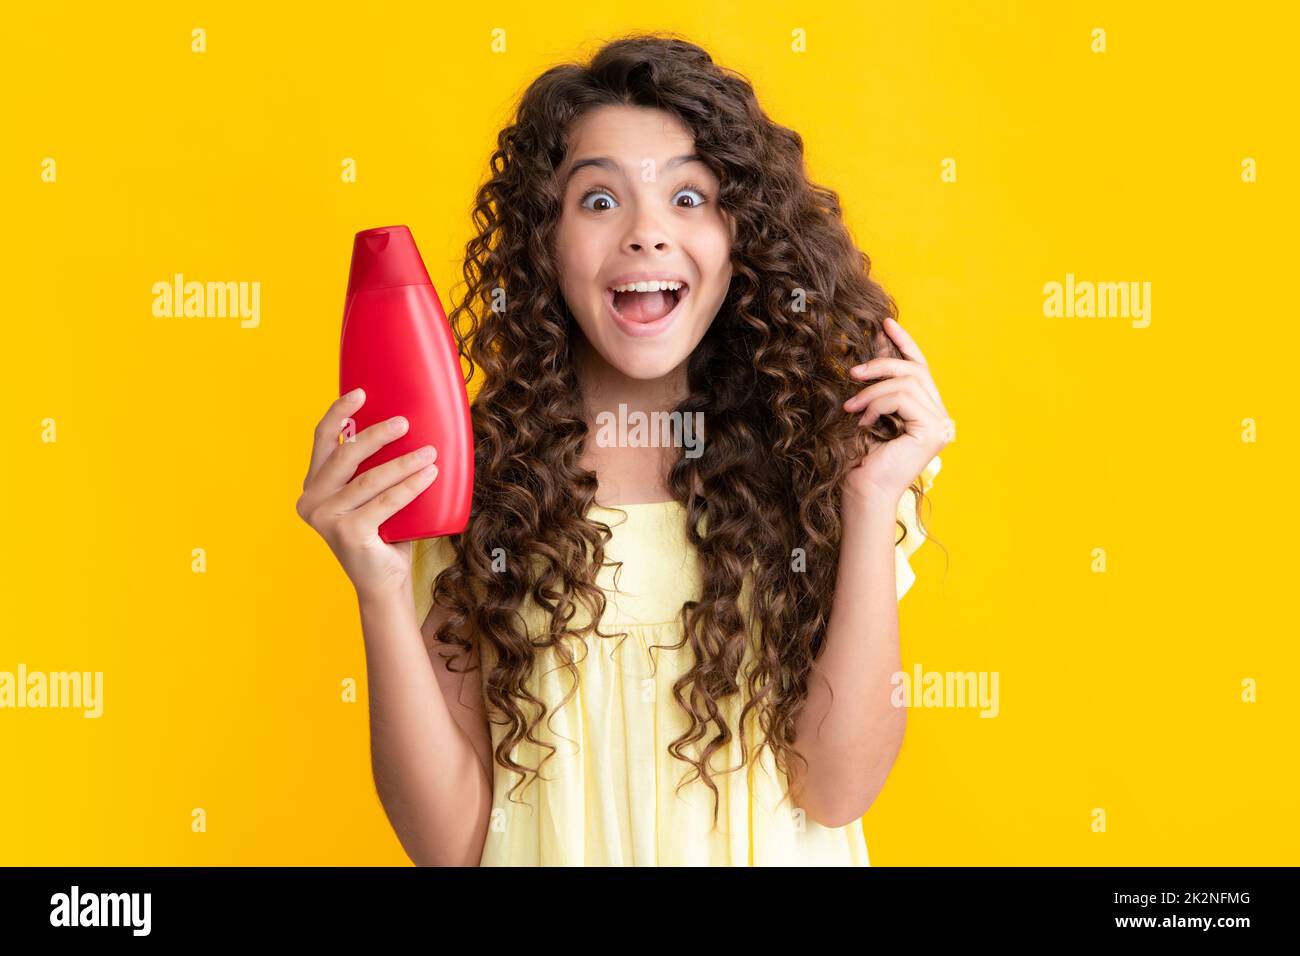 Teenage girl with shampoos conditioners or shower gel. Kids hair care cosmetic product, shampoo bottle. Excited teenager, glad amazed and overjoyed Stock Photo